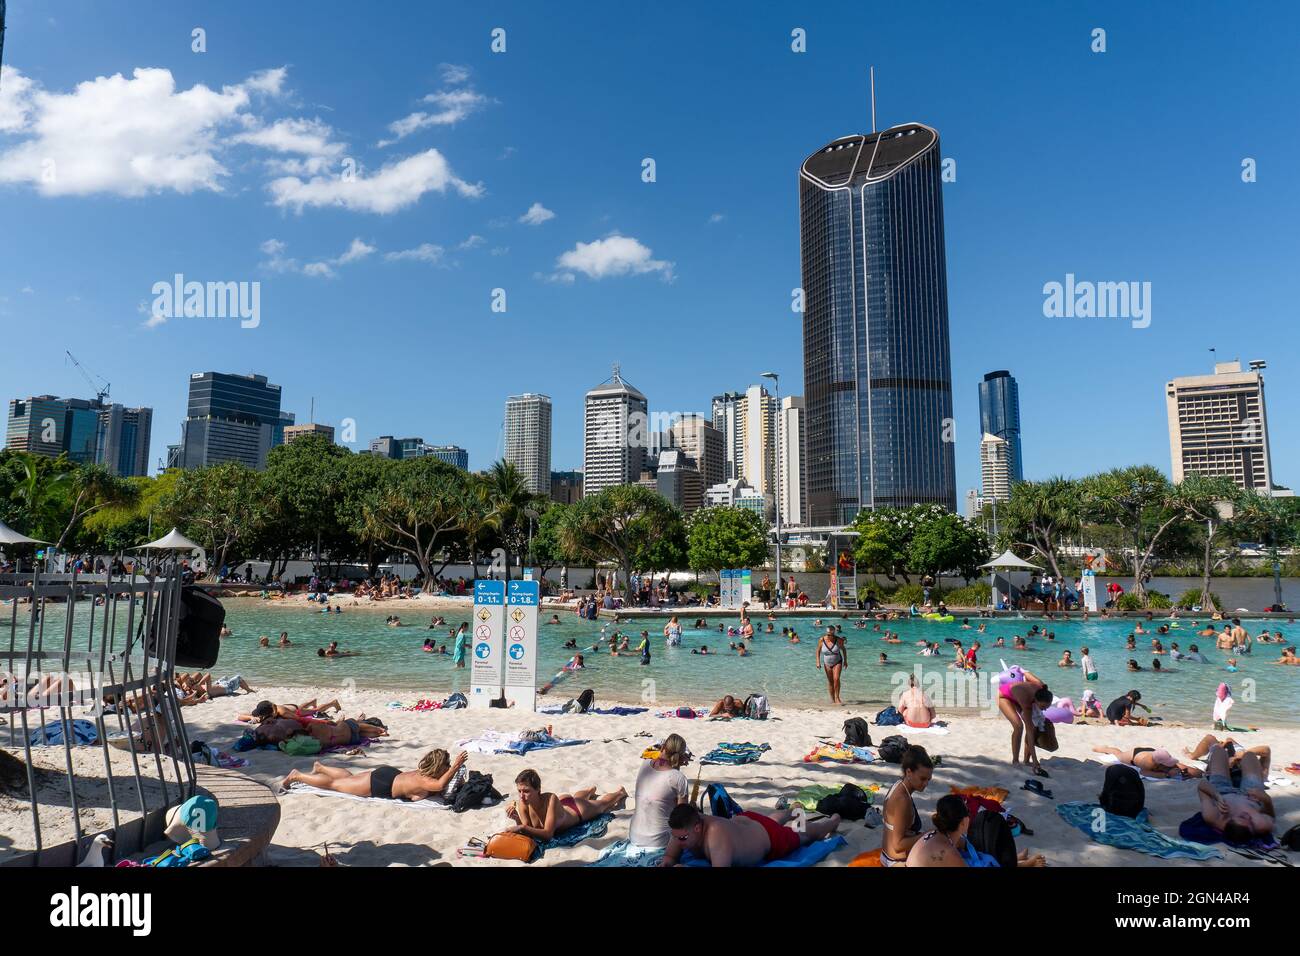 BRISBAEN, AUSTRALIA - Aug 10, 2021: A breathtaking view of Brisbane downtown. People are enjoying summer and good weather on the street. Stock Photo